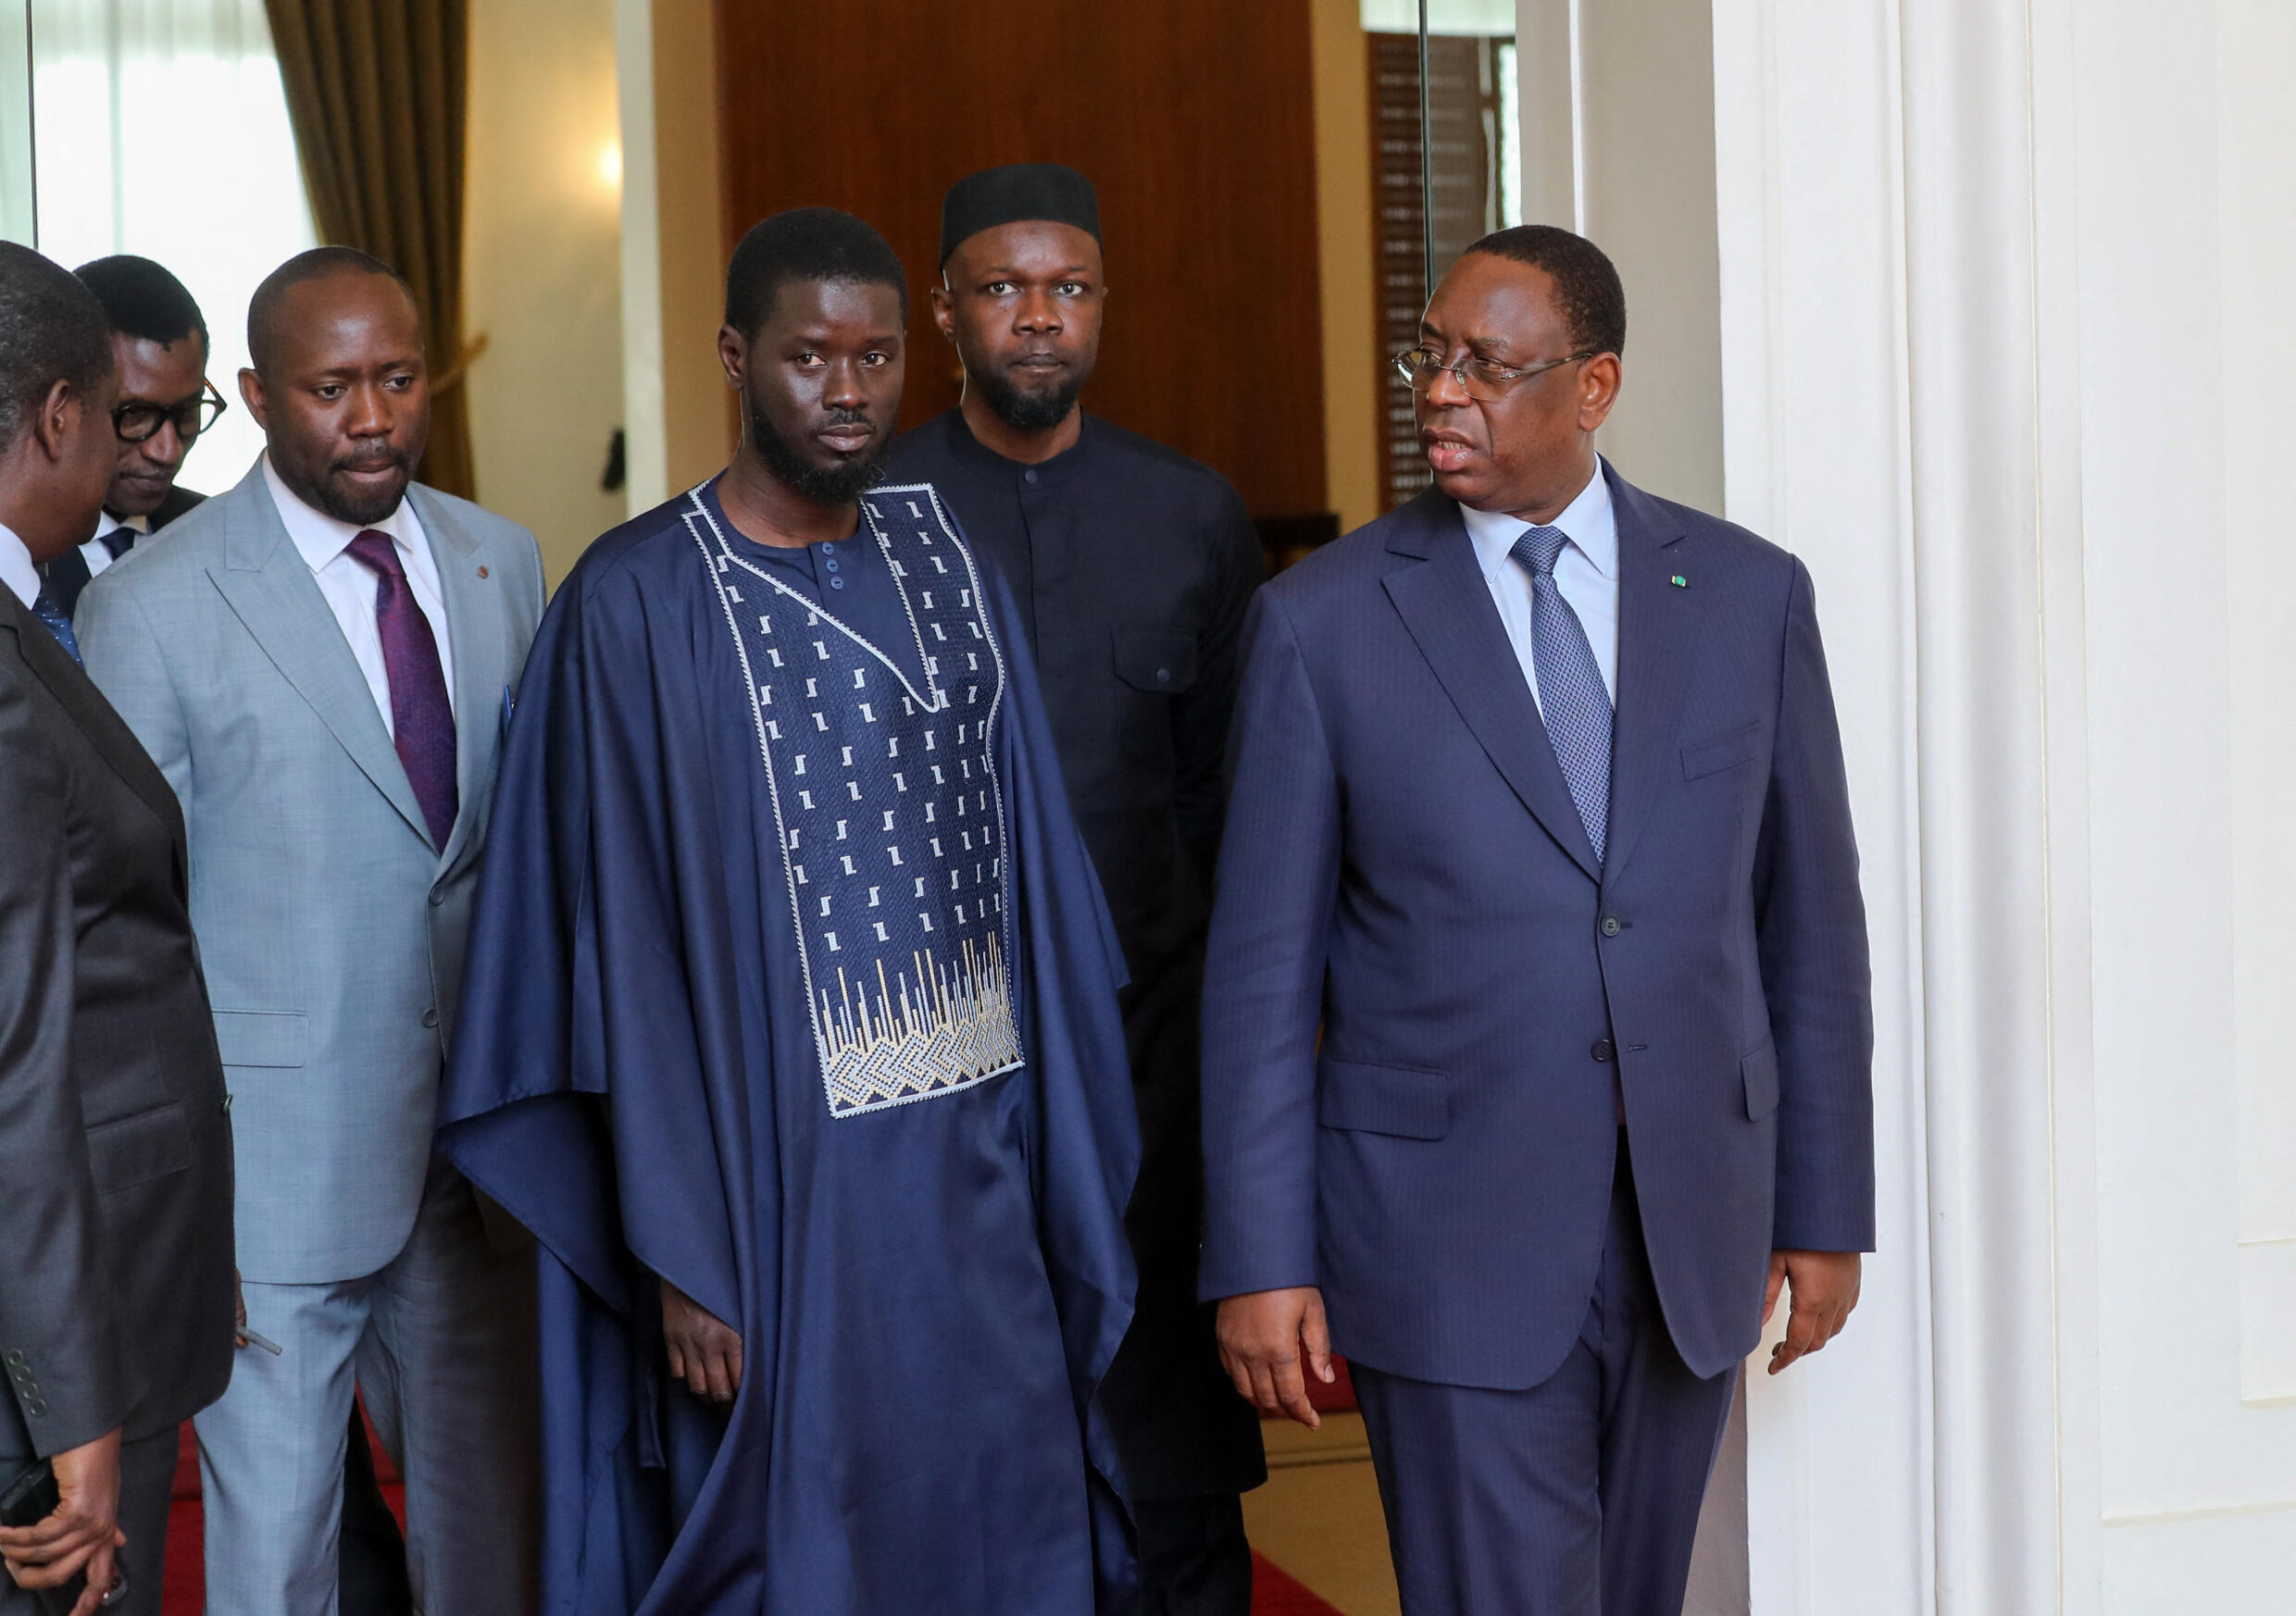 This handout picture distributed by the Senegalese Presidency on March 28, 2024 shows Ousmane Sonko (2nd R), outgoing President Macky Sall (R) and president-elect Bassirou Diomaye Faye.